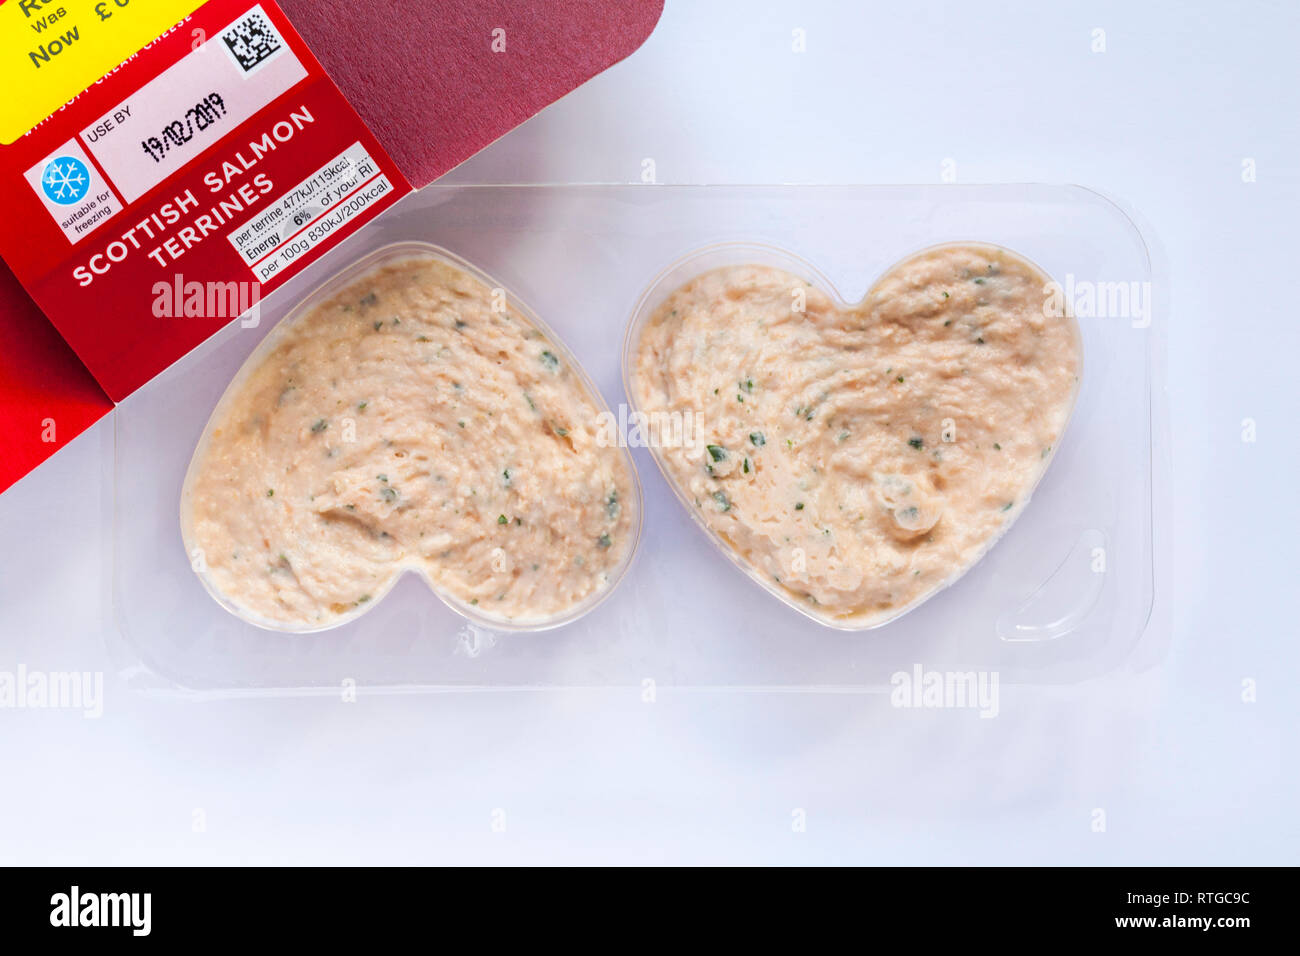 M&S Scottish Salmon Terrines - starter for Valentines Day meal concept - looking down on from above Stock Photo